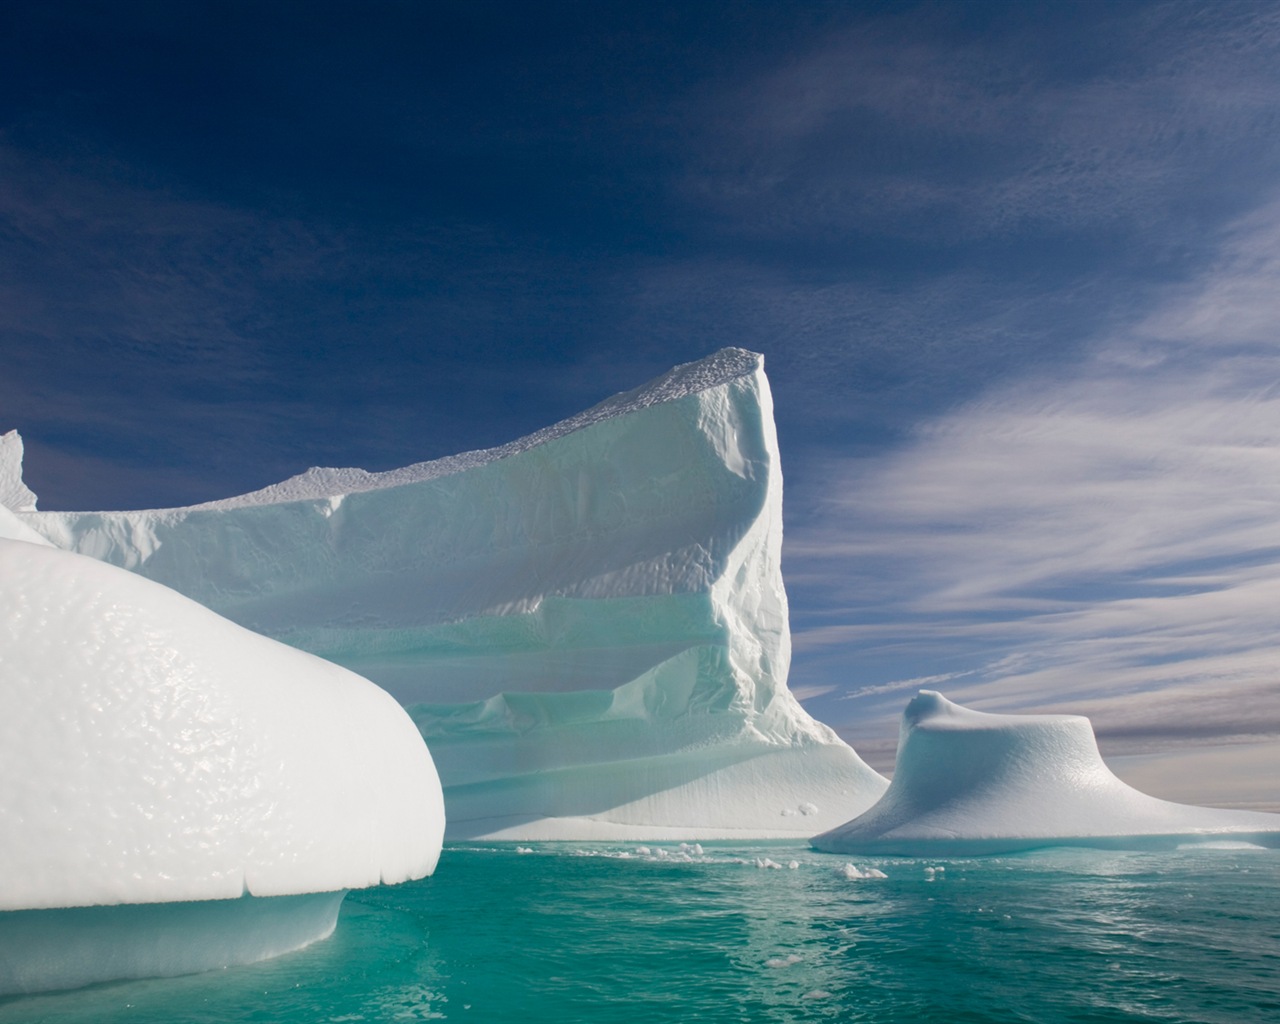 Windows 8 Wallpapers: Arctic, the nature ecological landscape, arctic animals #14 - 1280x1024